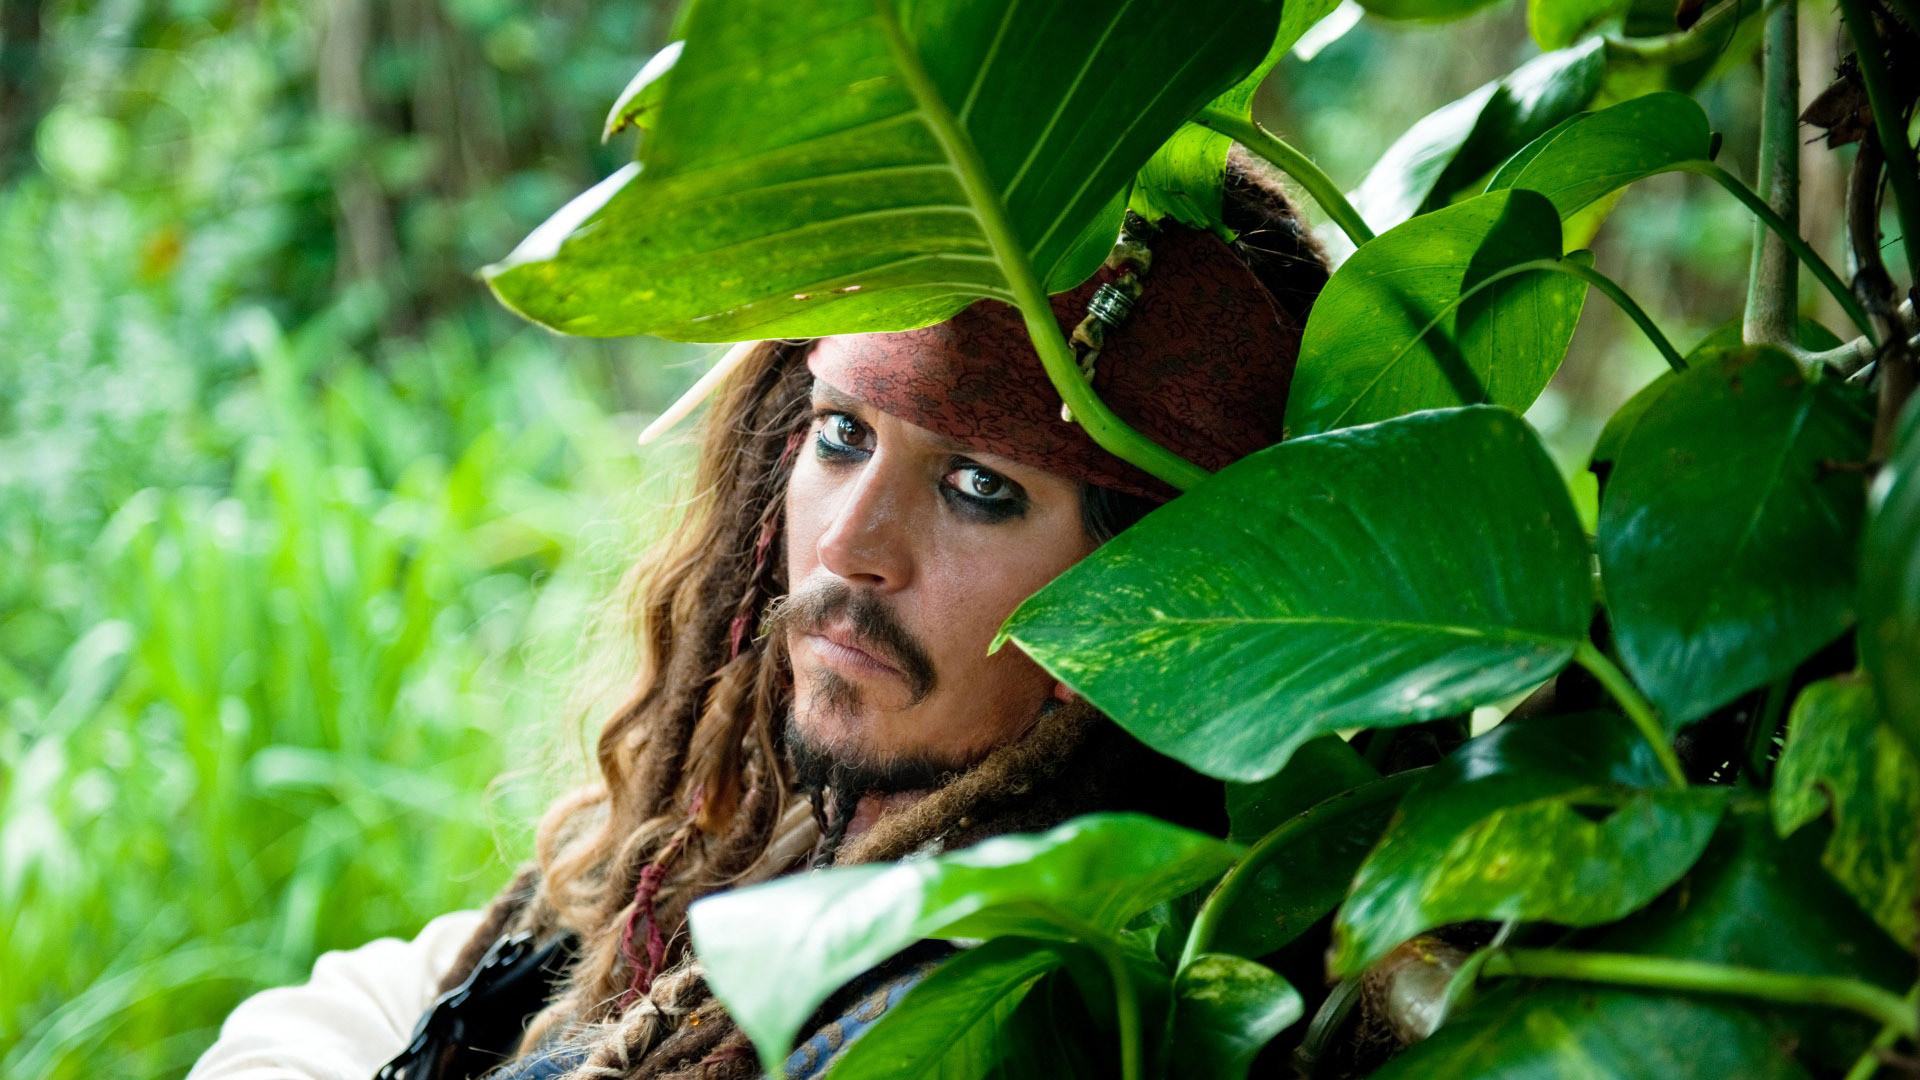 1920x1080 Jack Sparrow - Pirates of the Caribbean: On Stranger Tides HD Wallpaper  